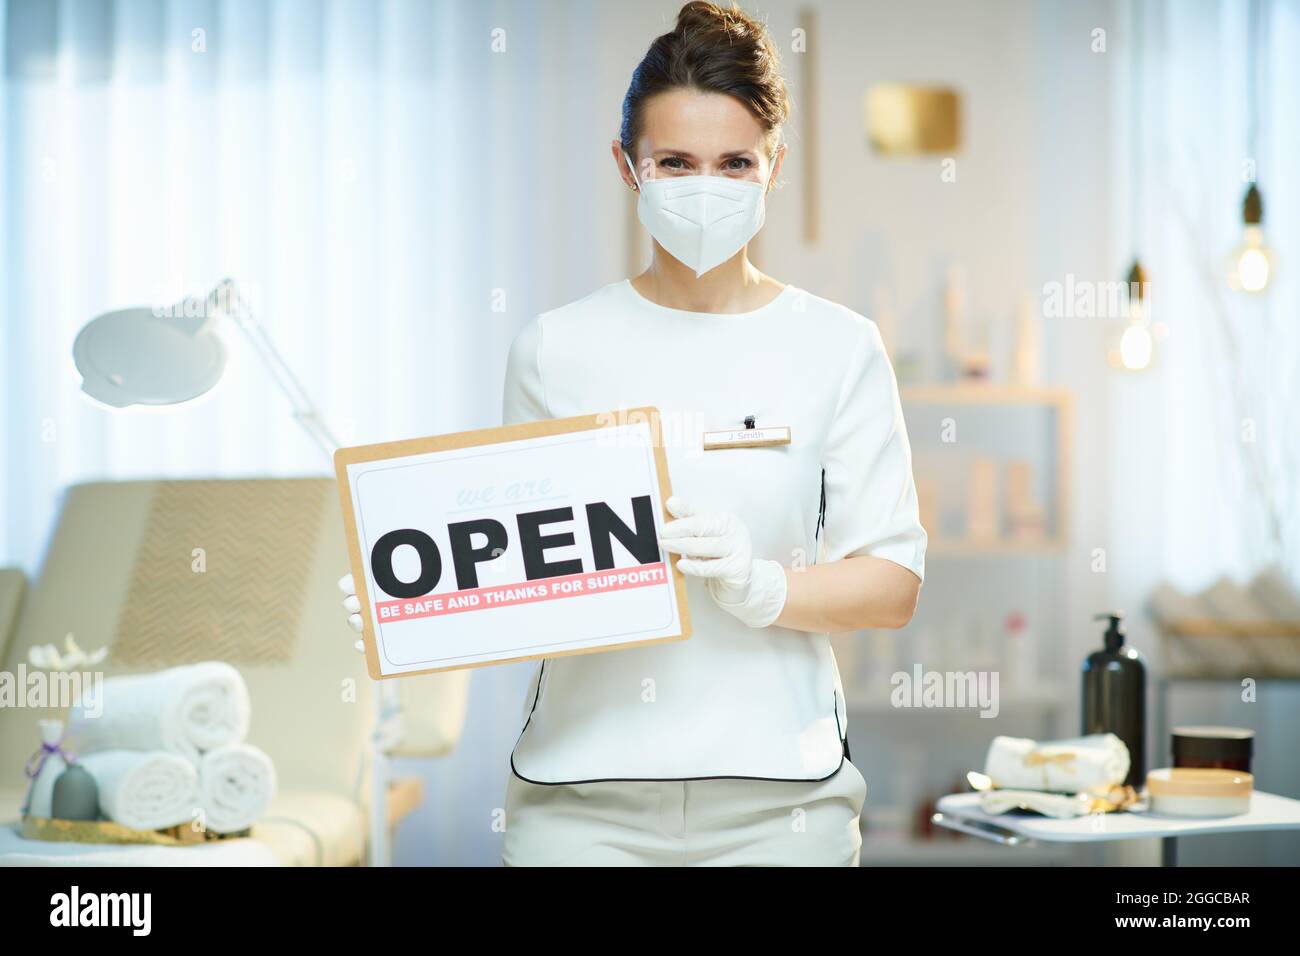 Business during covid-19 pandemic. female employee with ffp2 mask and open sign in modern beauty studio. Stock Photo